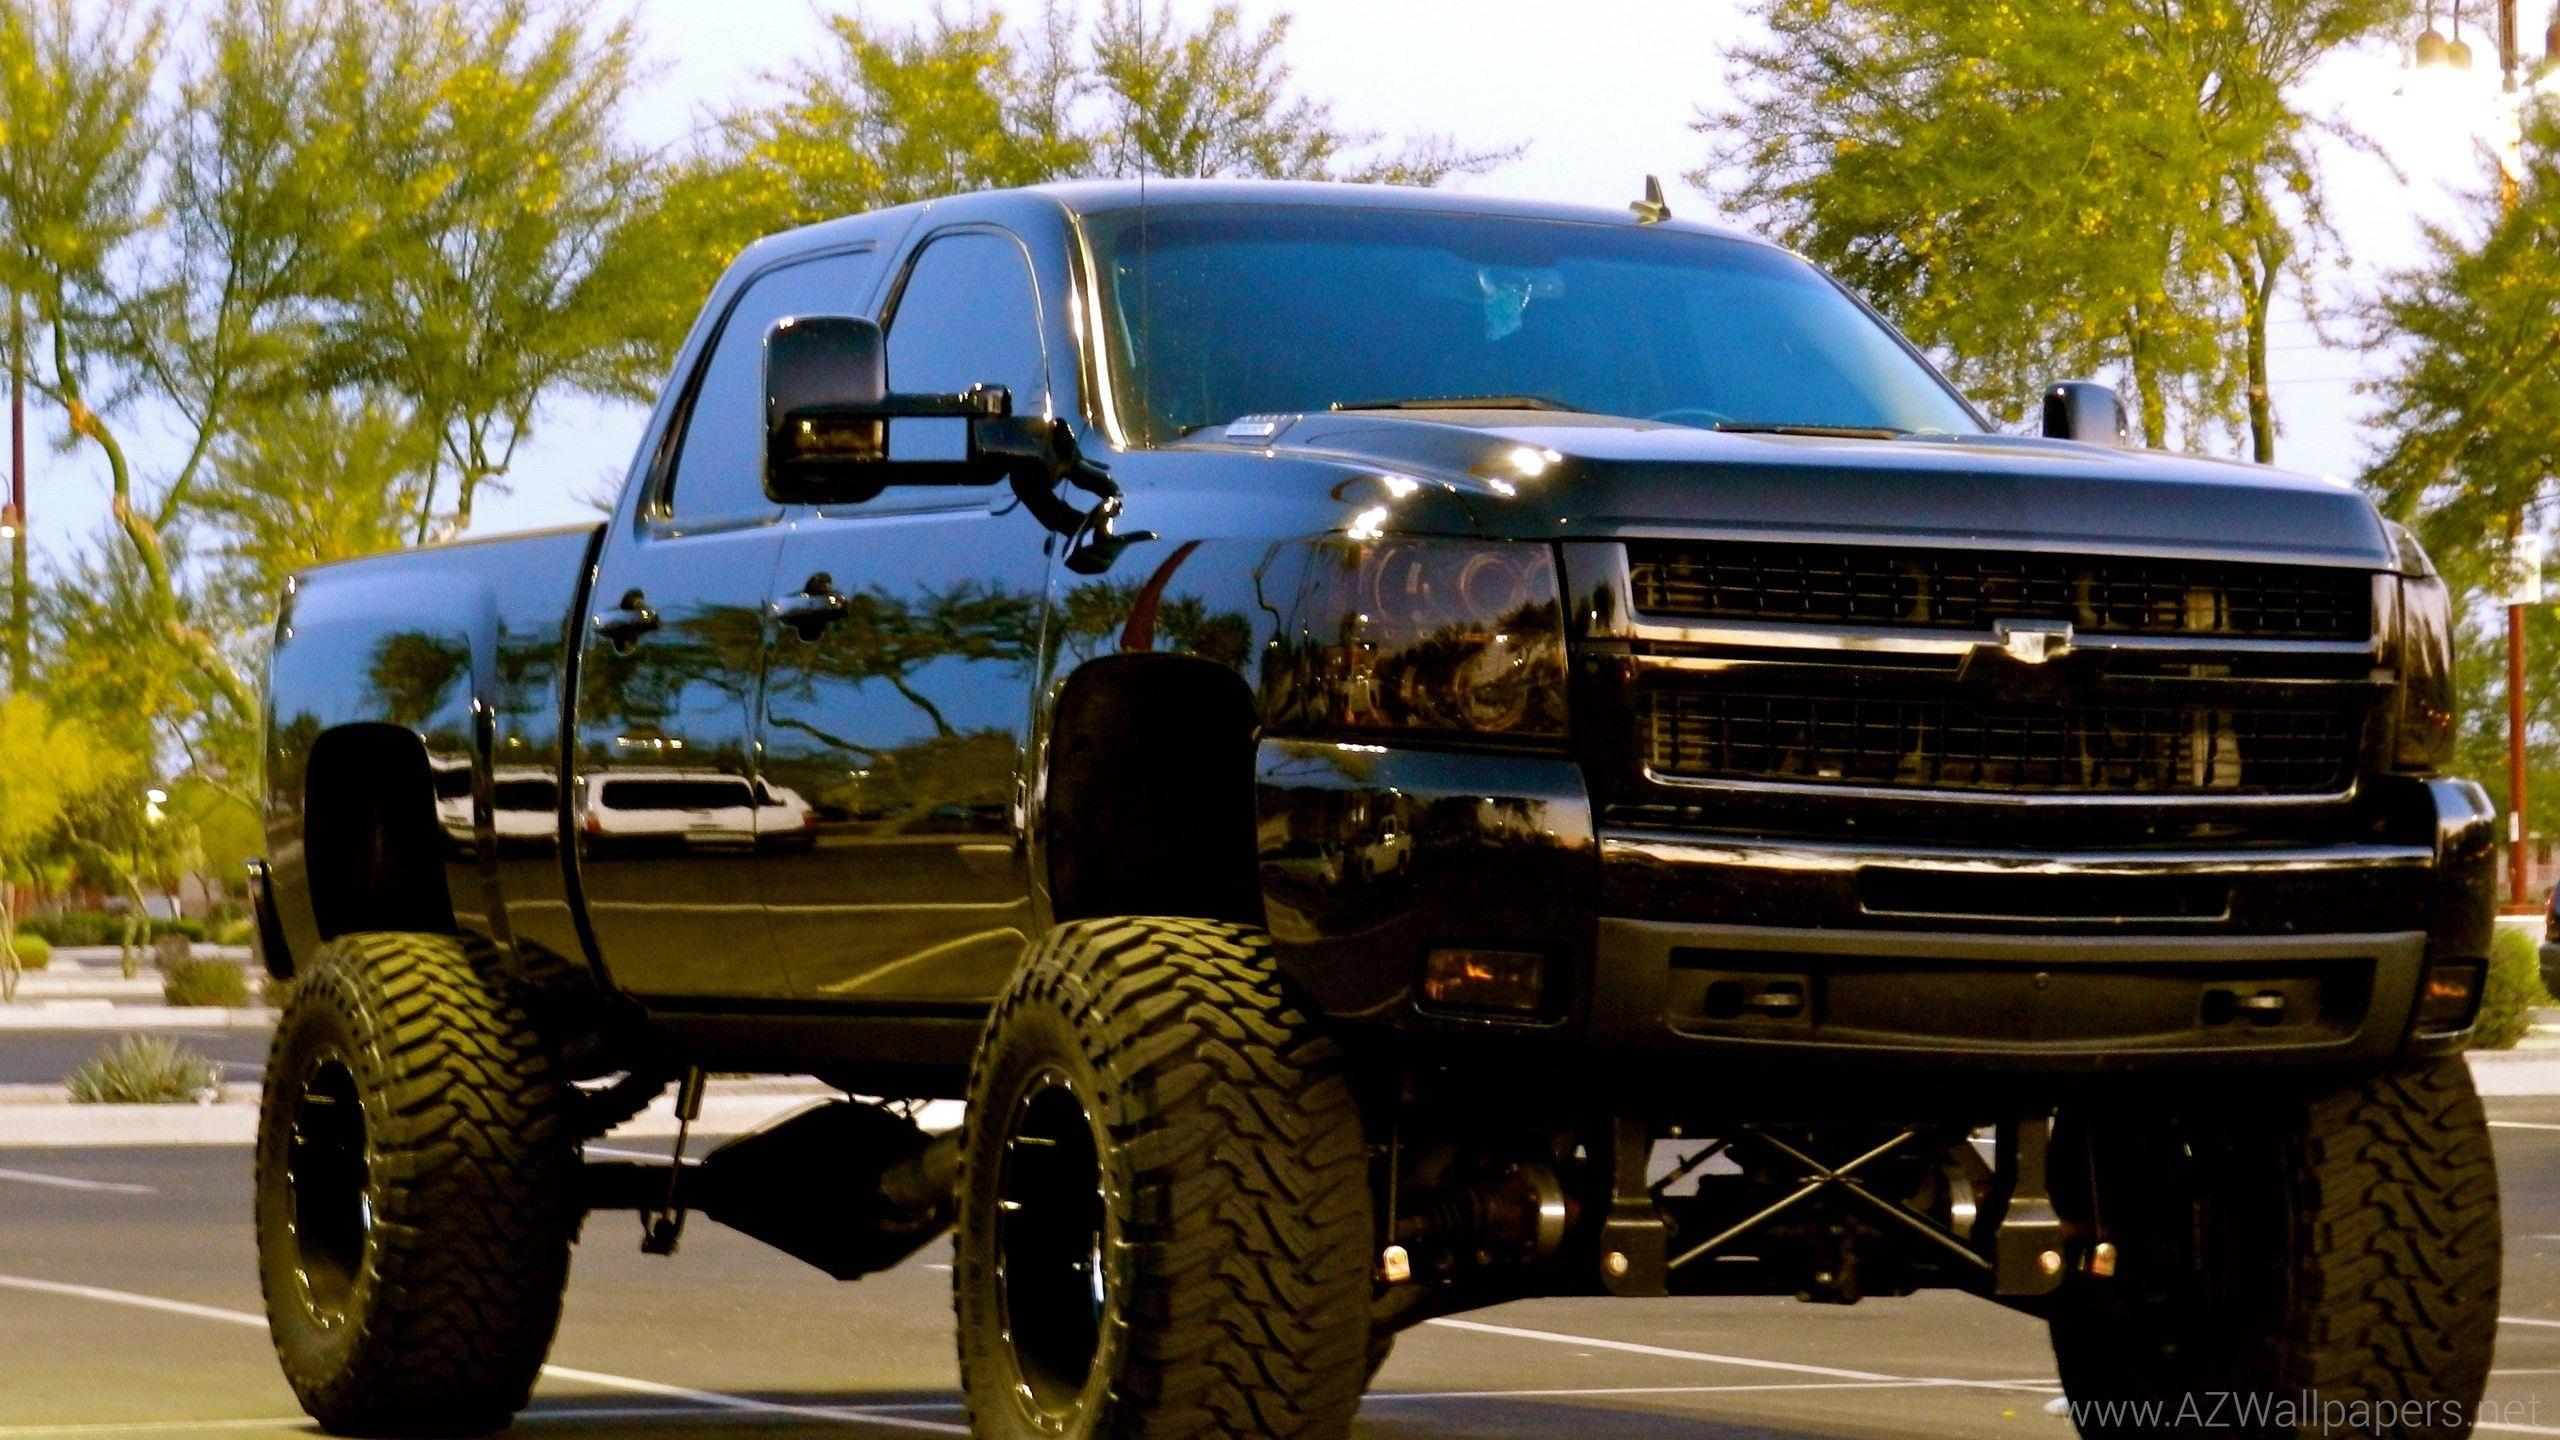 Lifted GMC Trucks Wallpapers - Wallpaper Cave